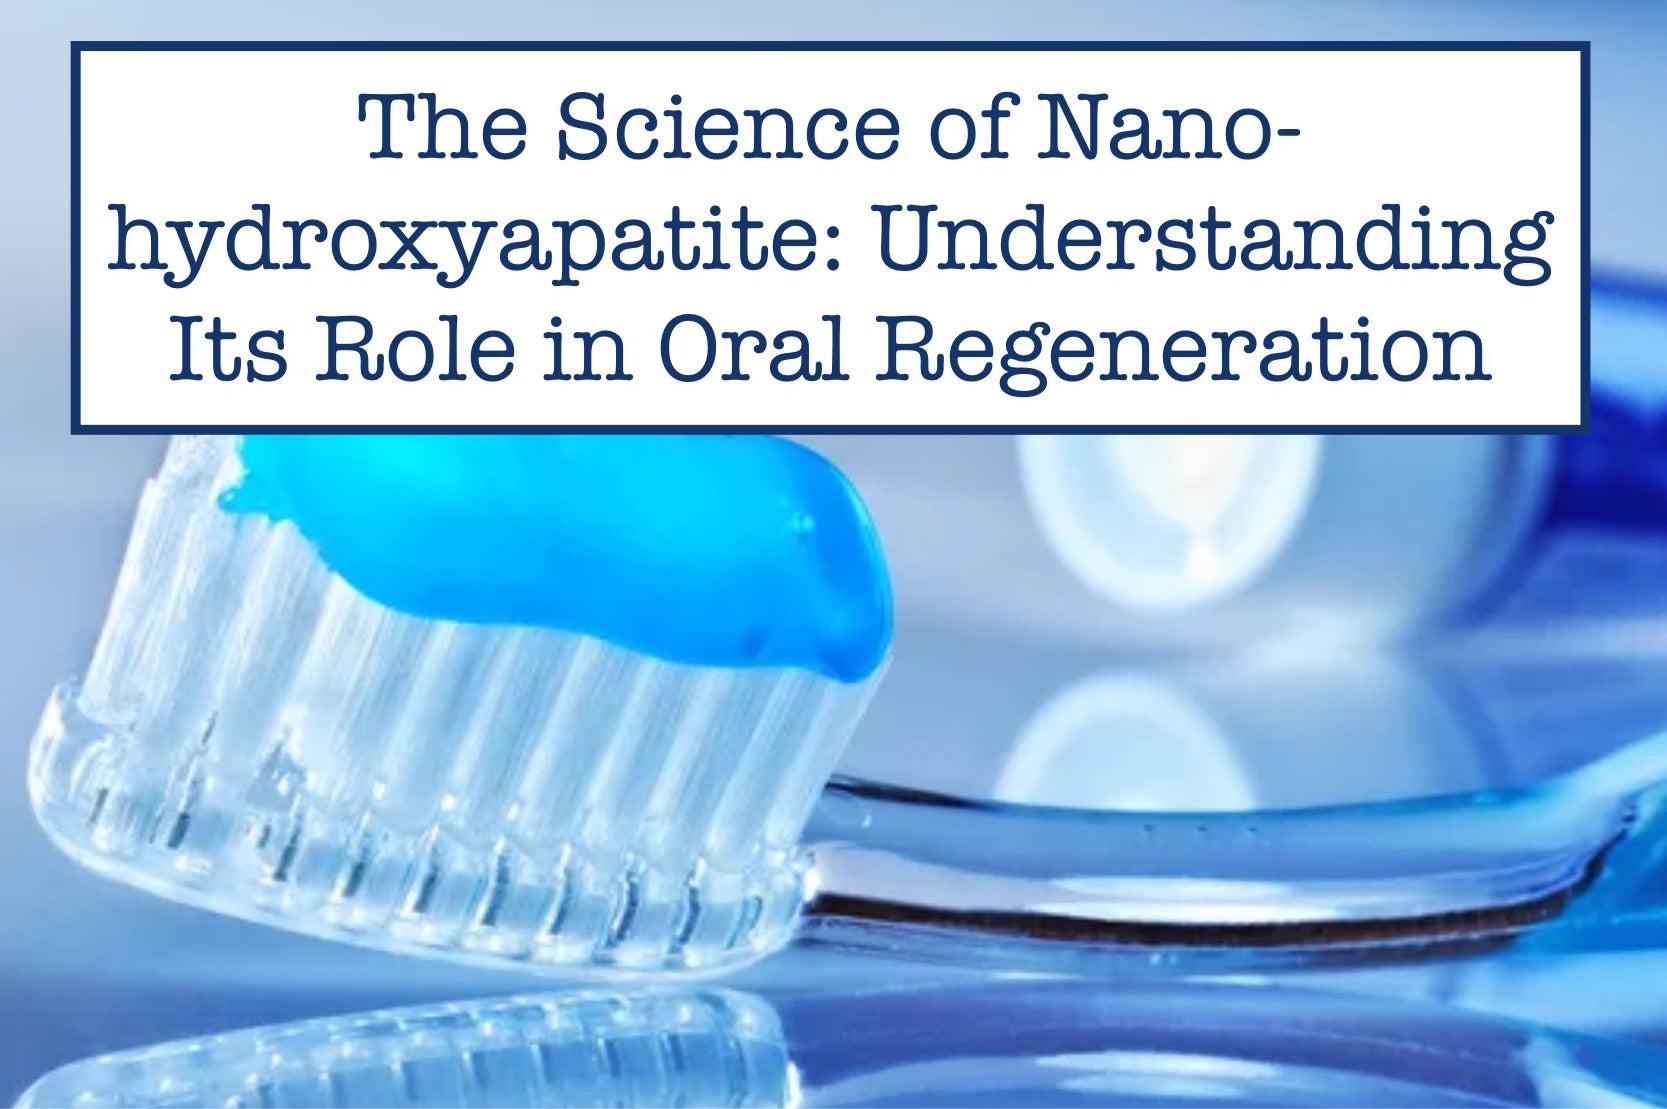 The Science of Nano-hydroxyapatite: Understanding Its Role in Oral Regeneration